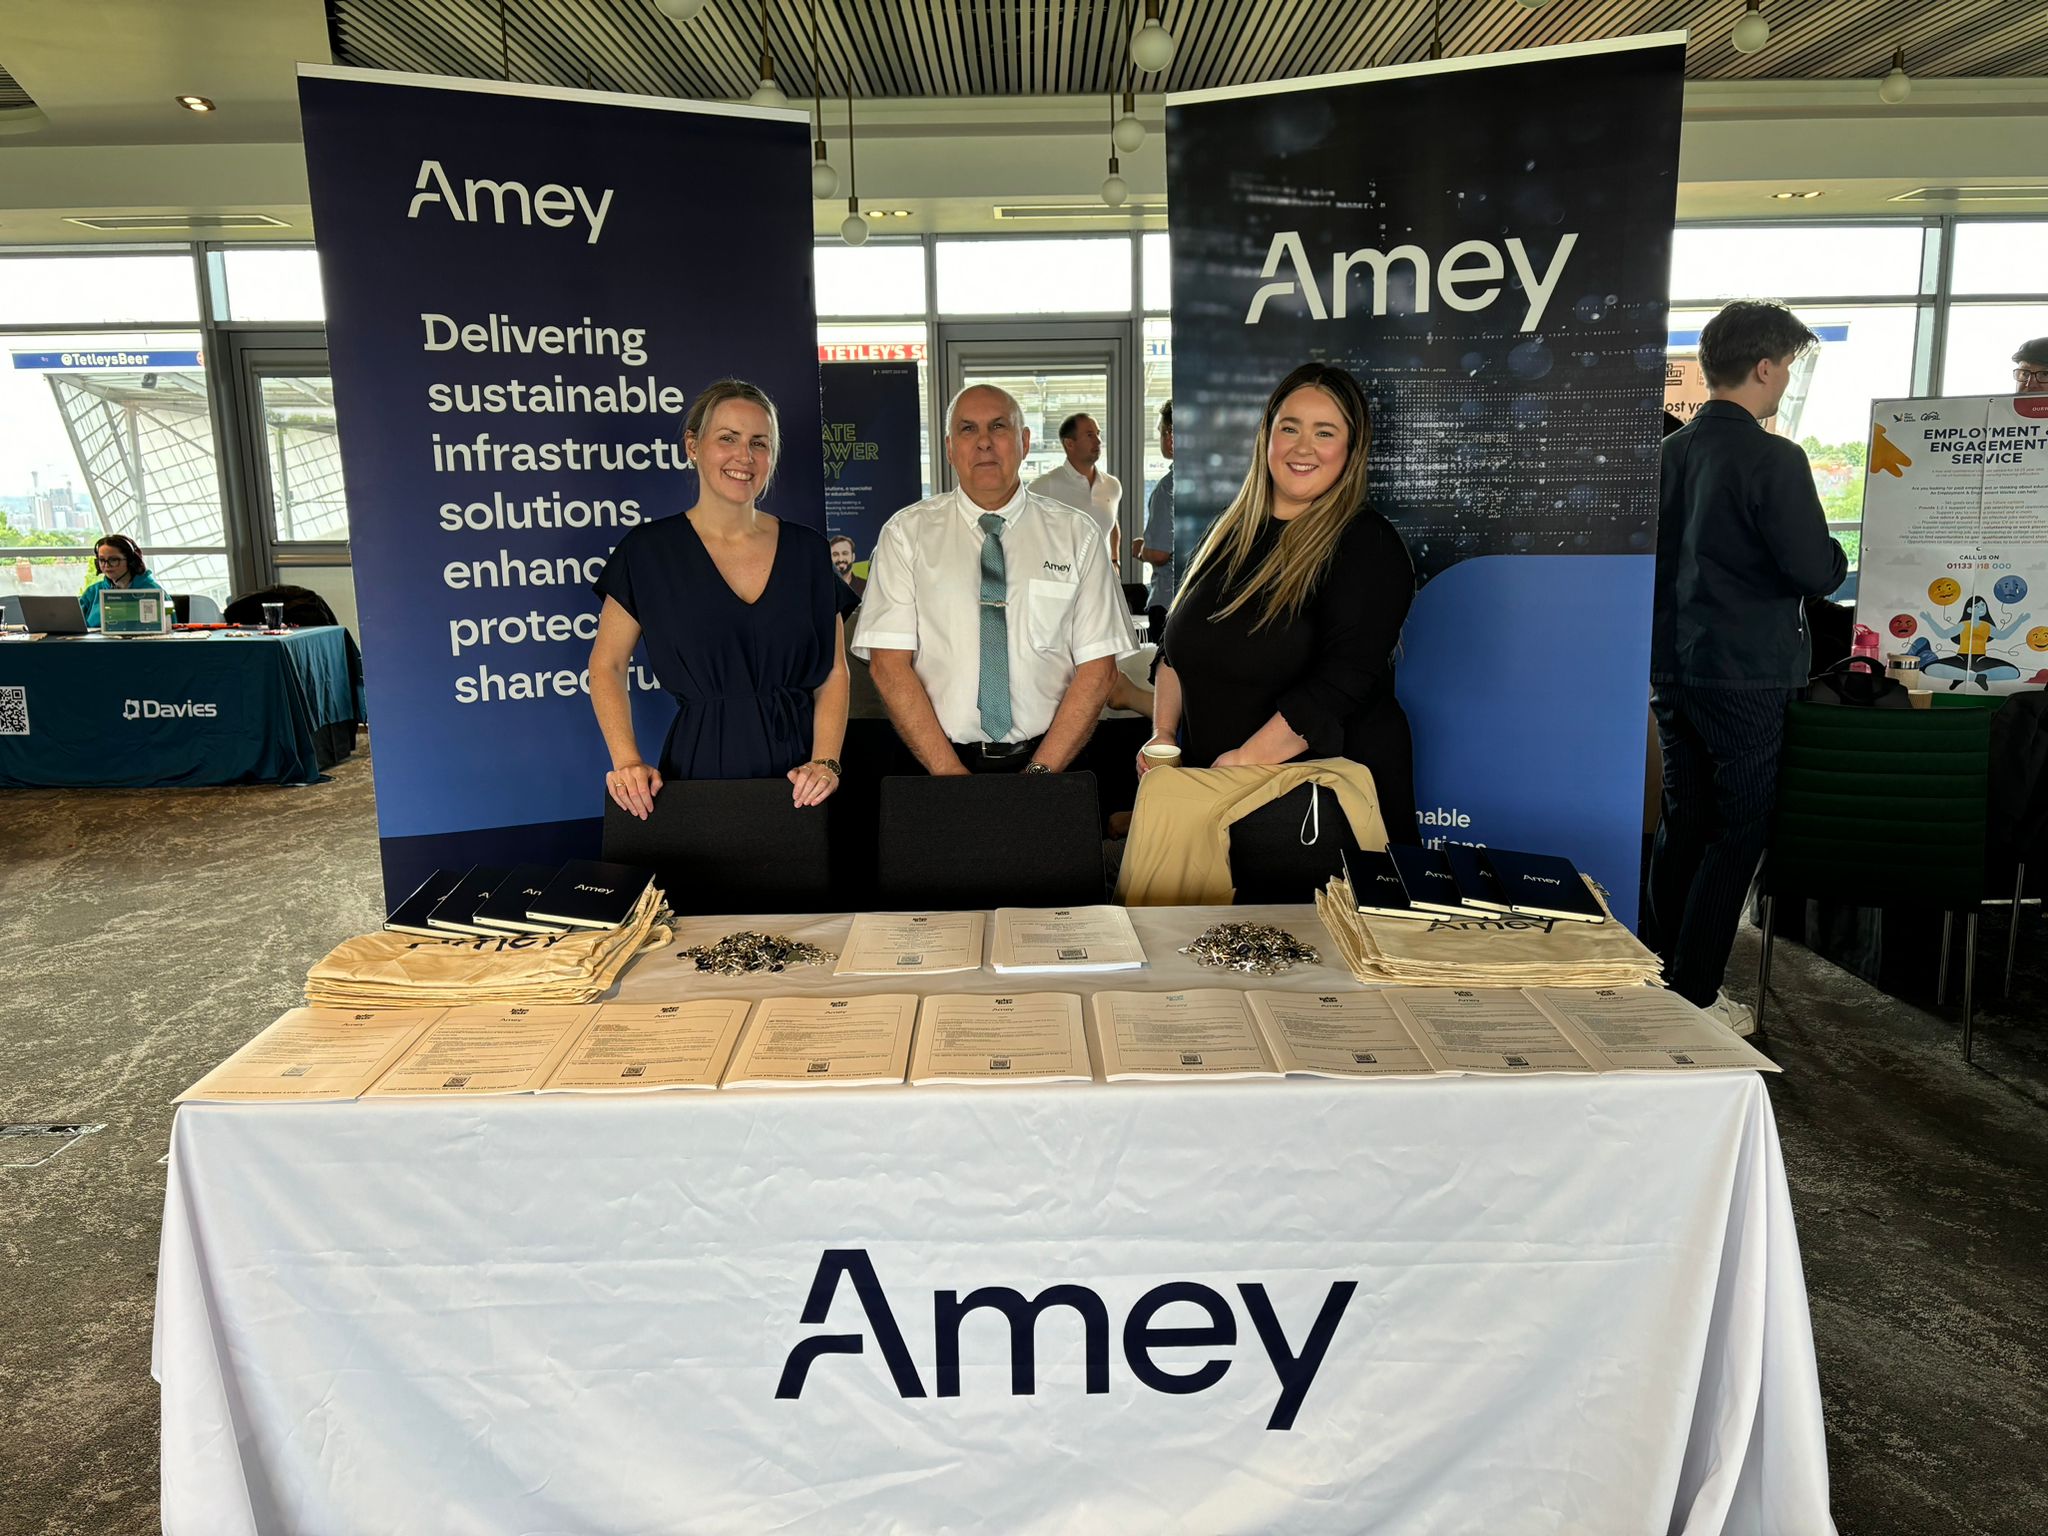 Amey at our event in Leeds